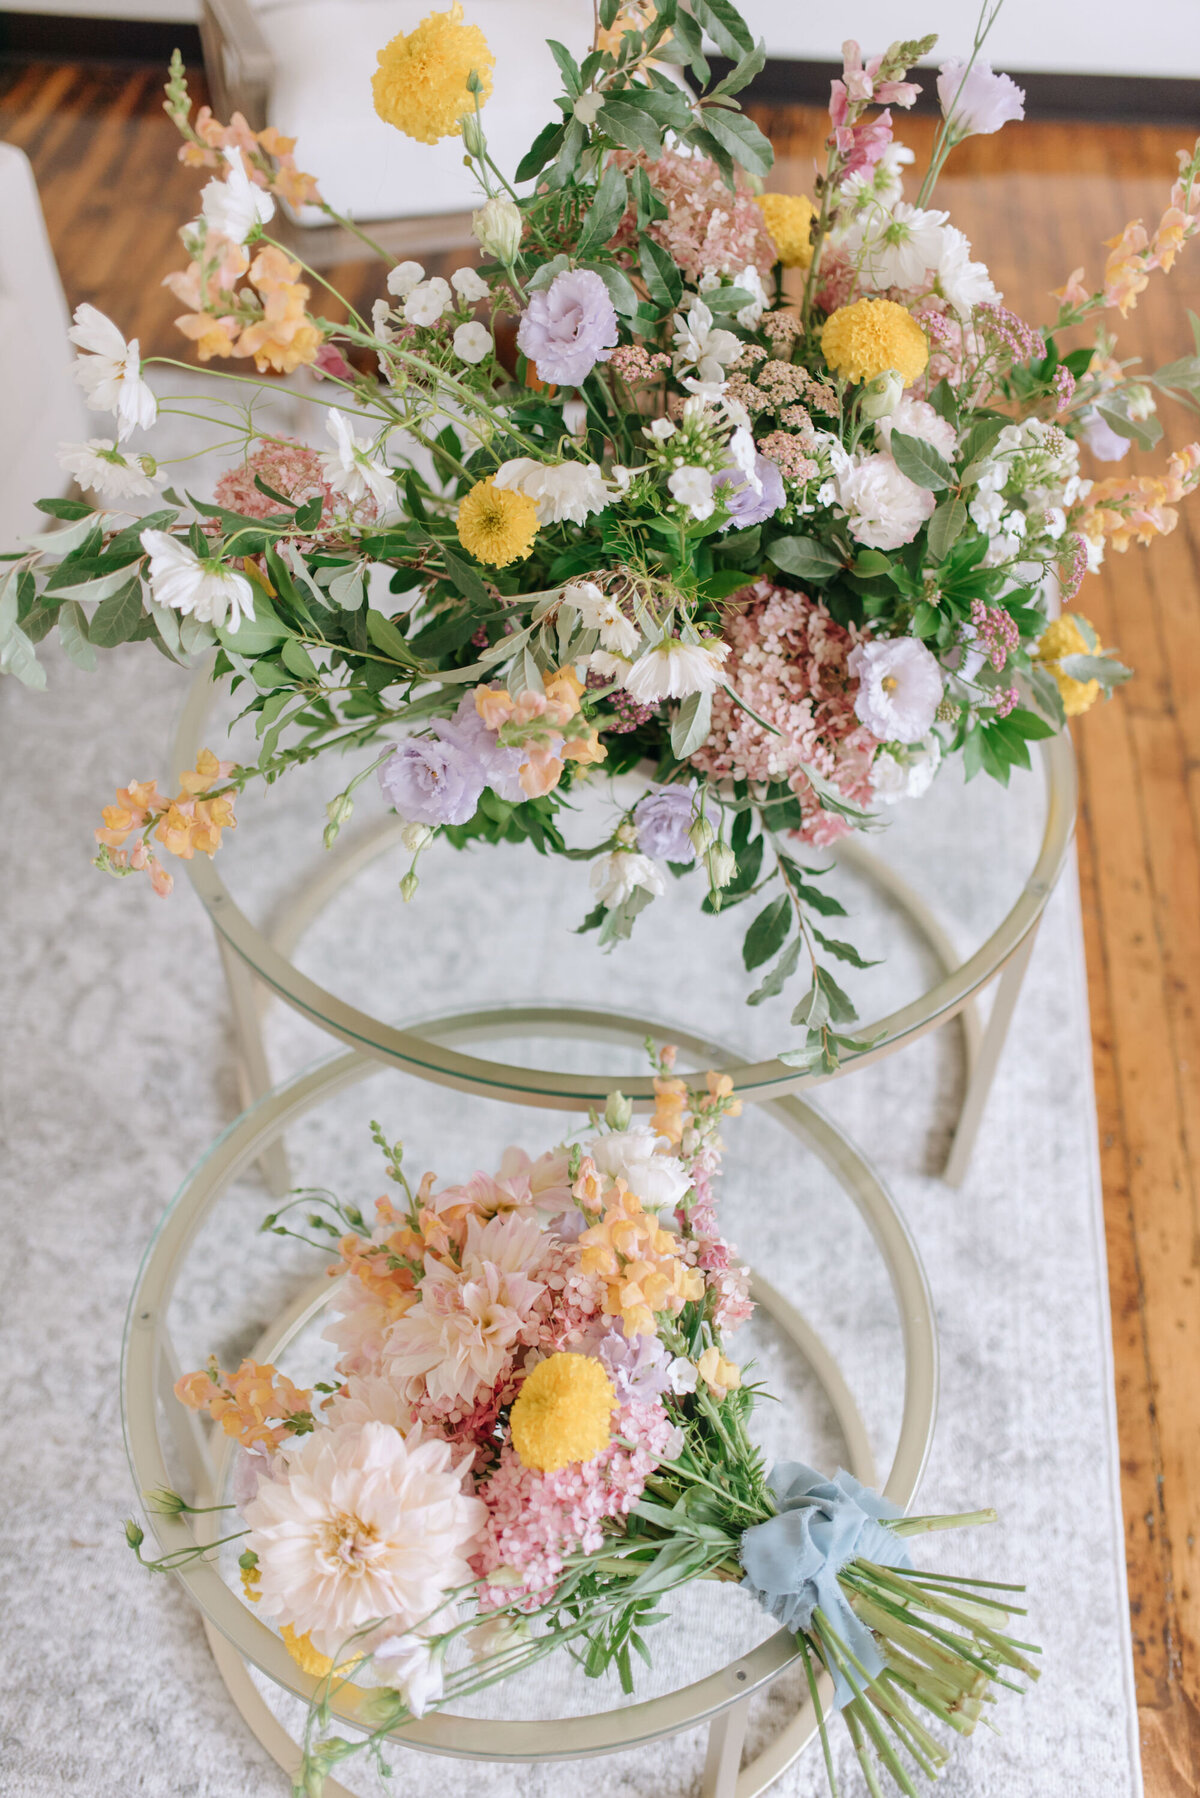 ct-wedding-florist-three-roots-floral-design-the-apiary-ct-4